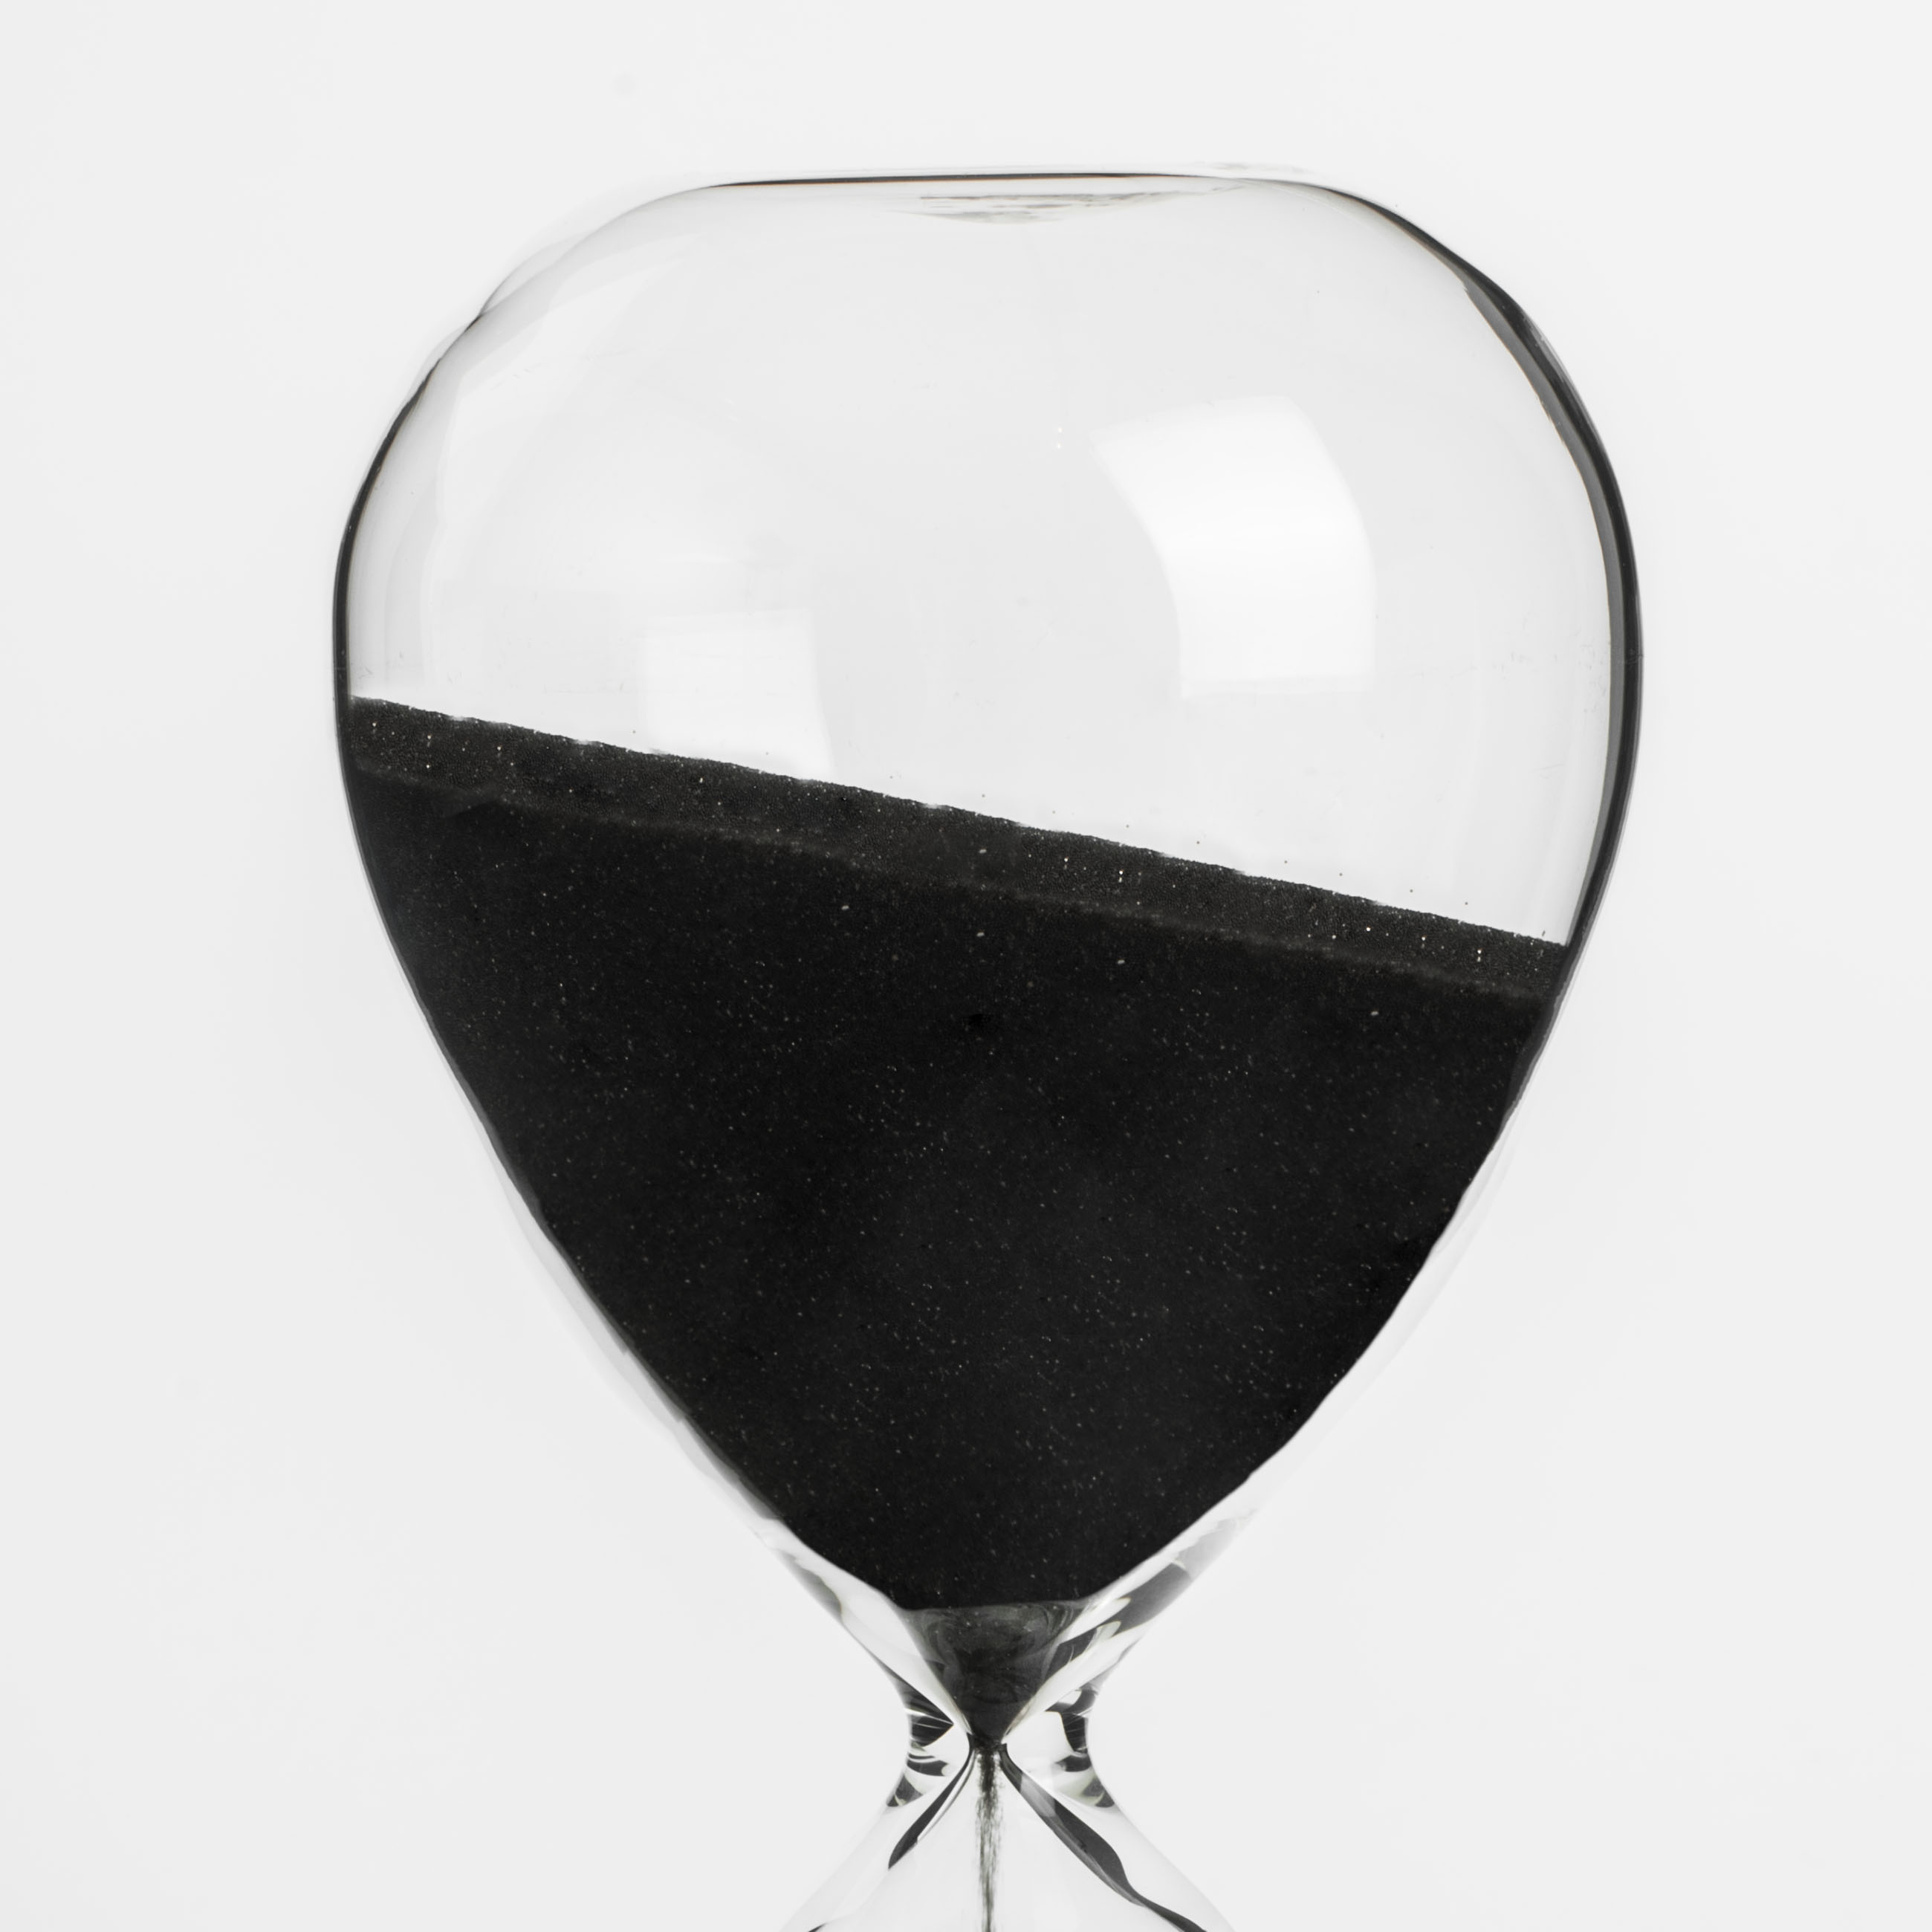 Hourglass clock, 20 cm, 15 minutes, Glass / sand, Horse in the sand, Sand time изображение № 3